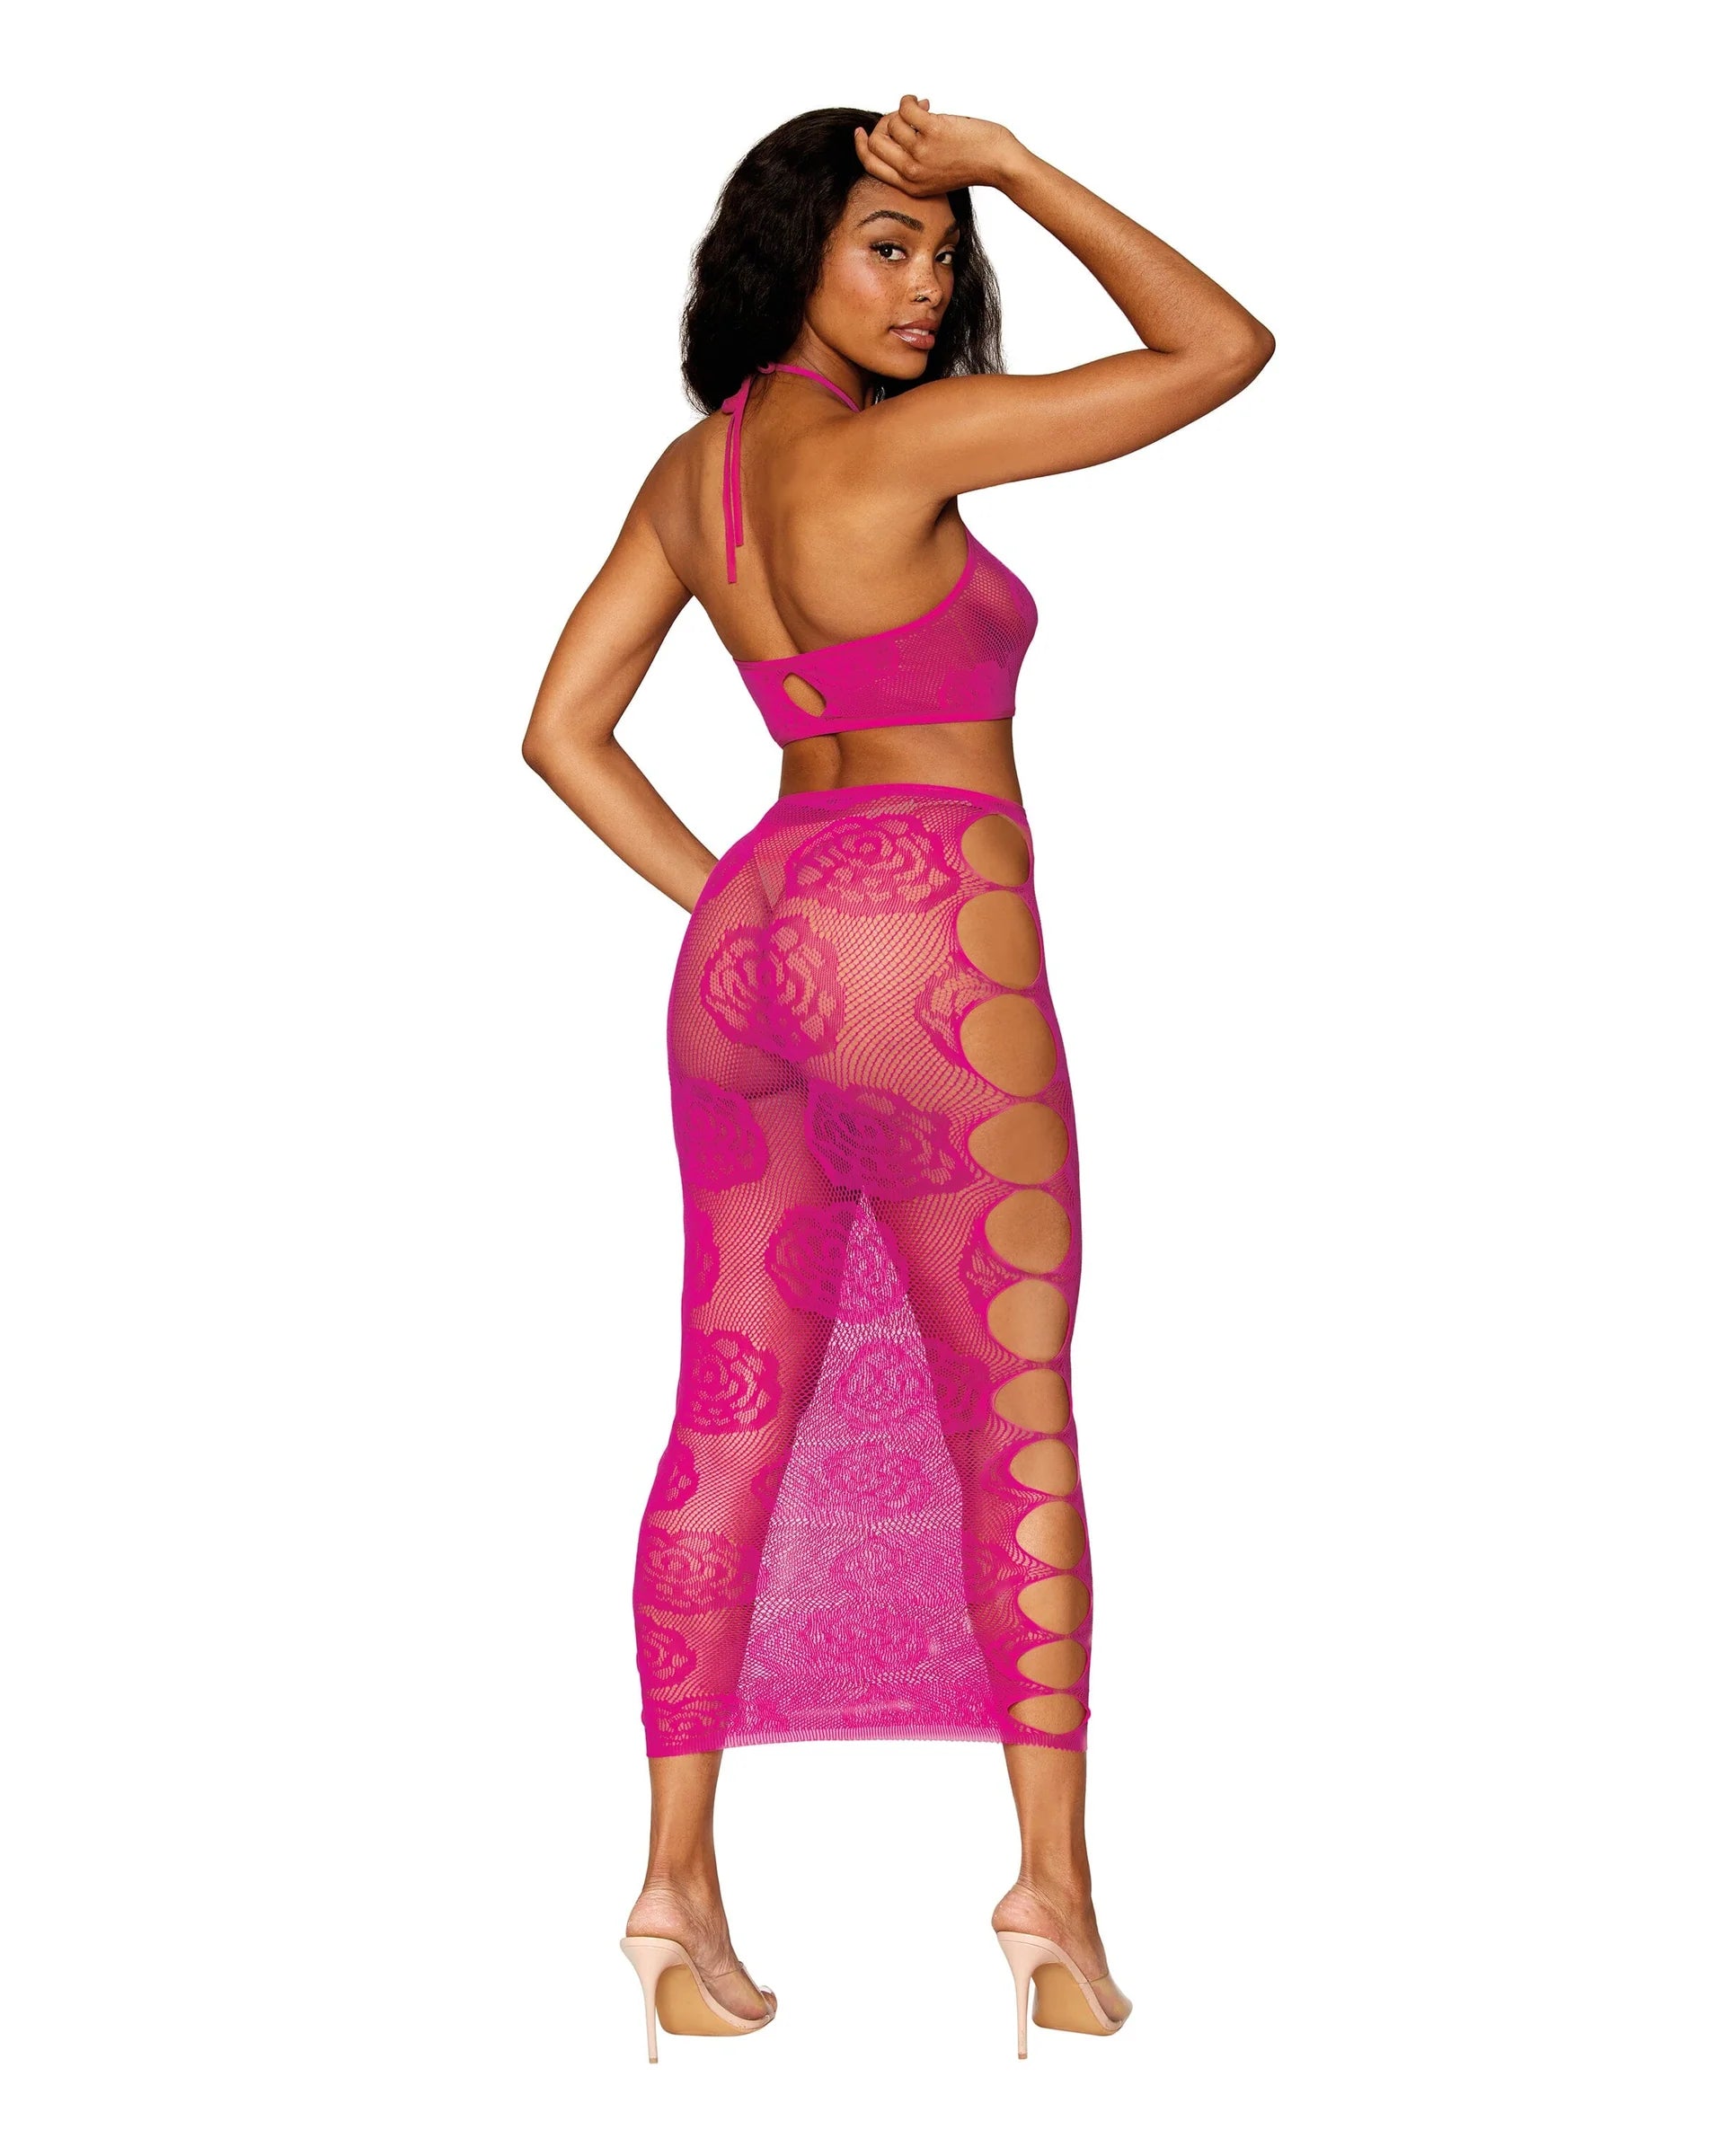 Seamless Bodystocking with Knitted Large Rose & Fishnet Pattern